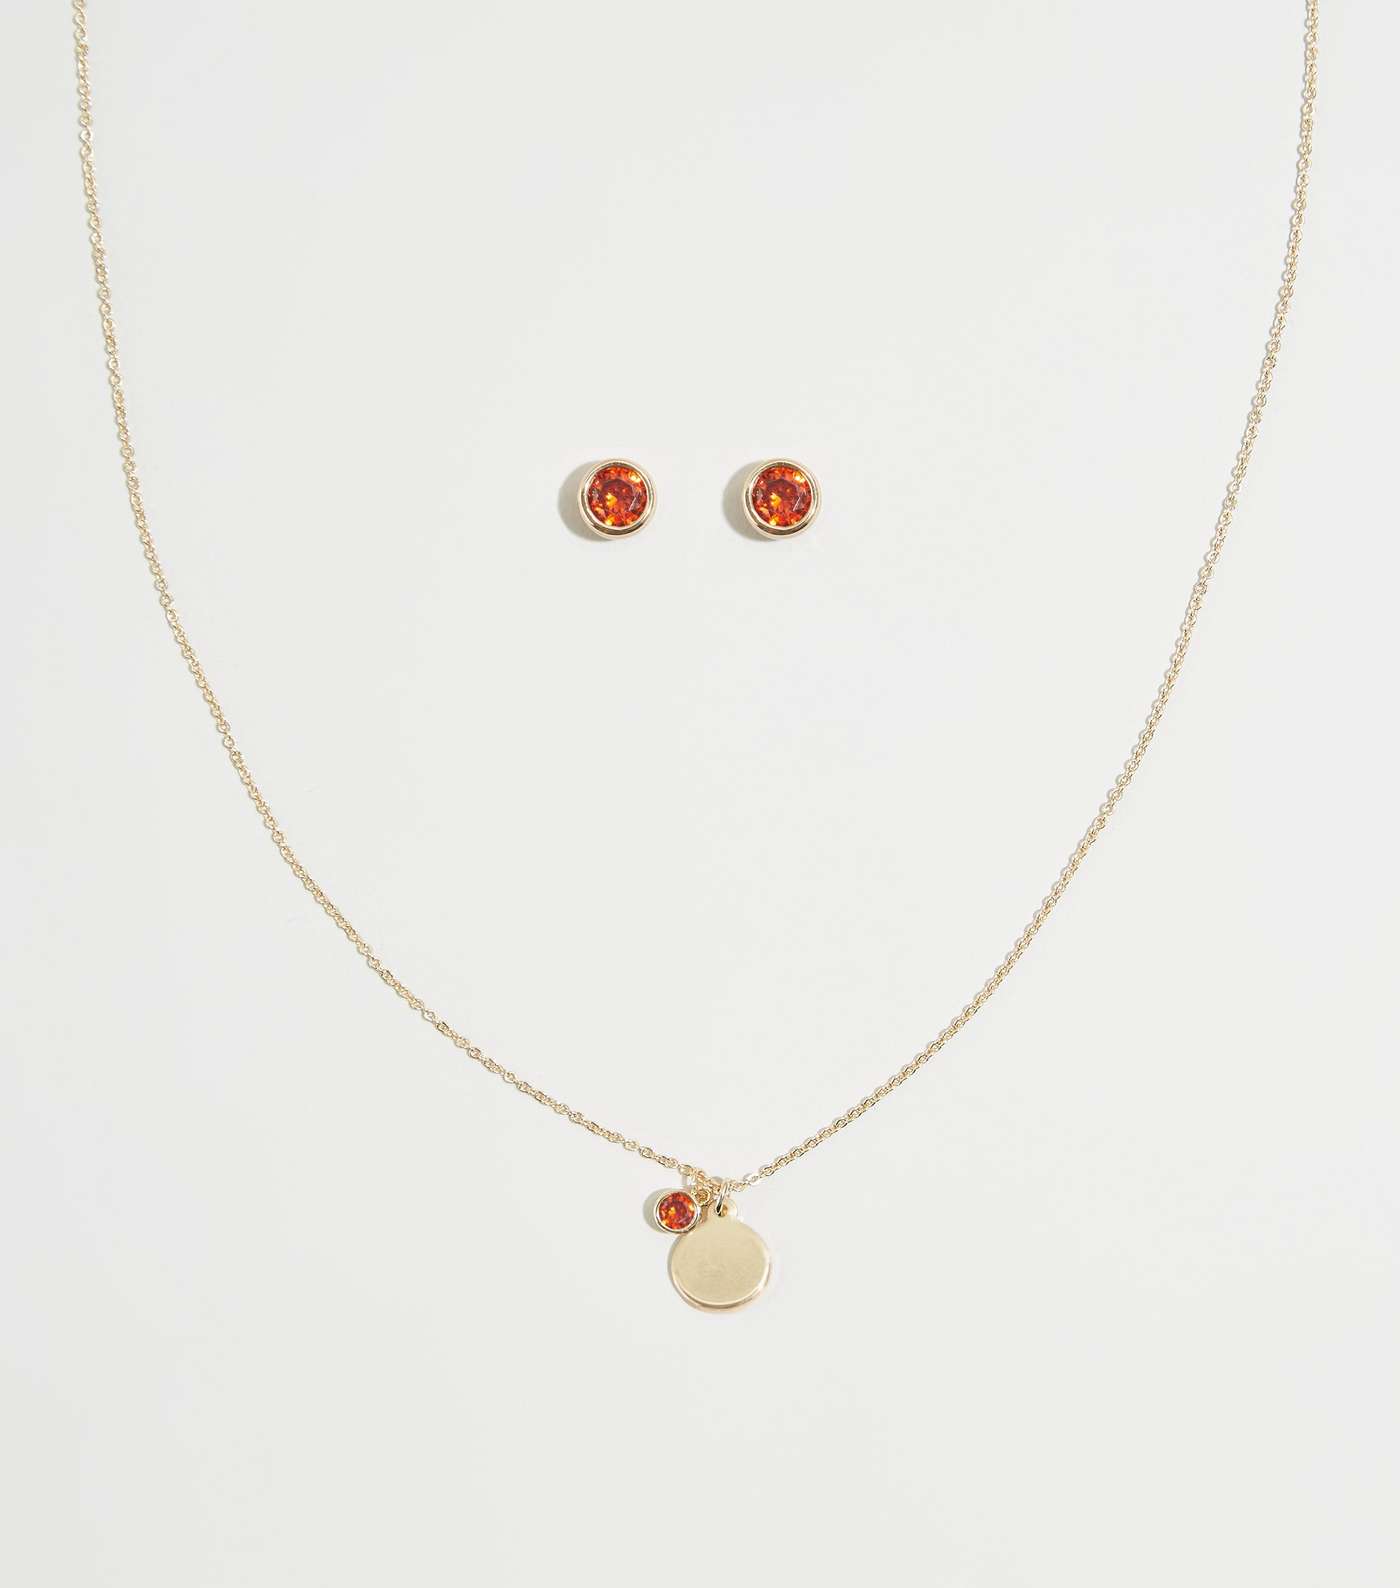 Rich Red July Birthstone Pendant and Earring Set